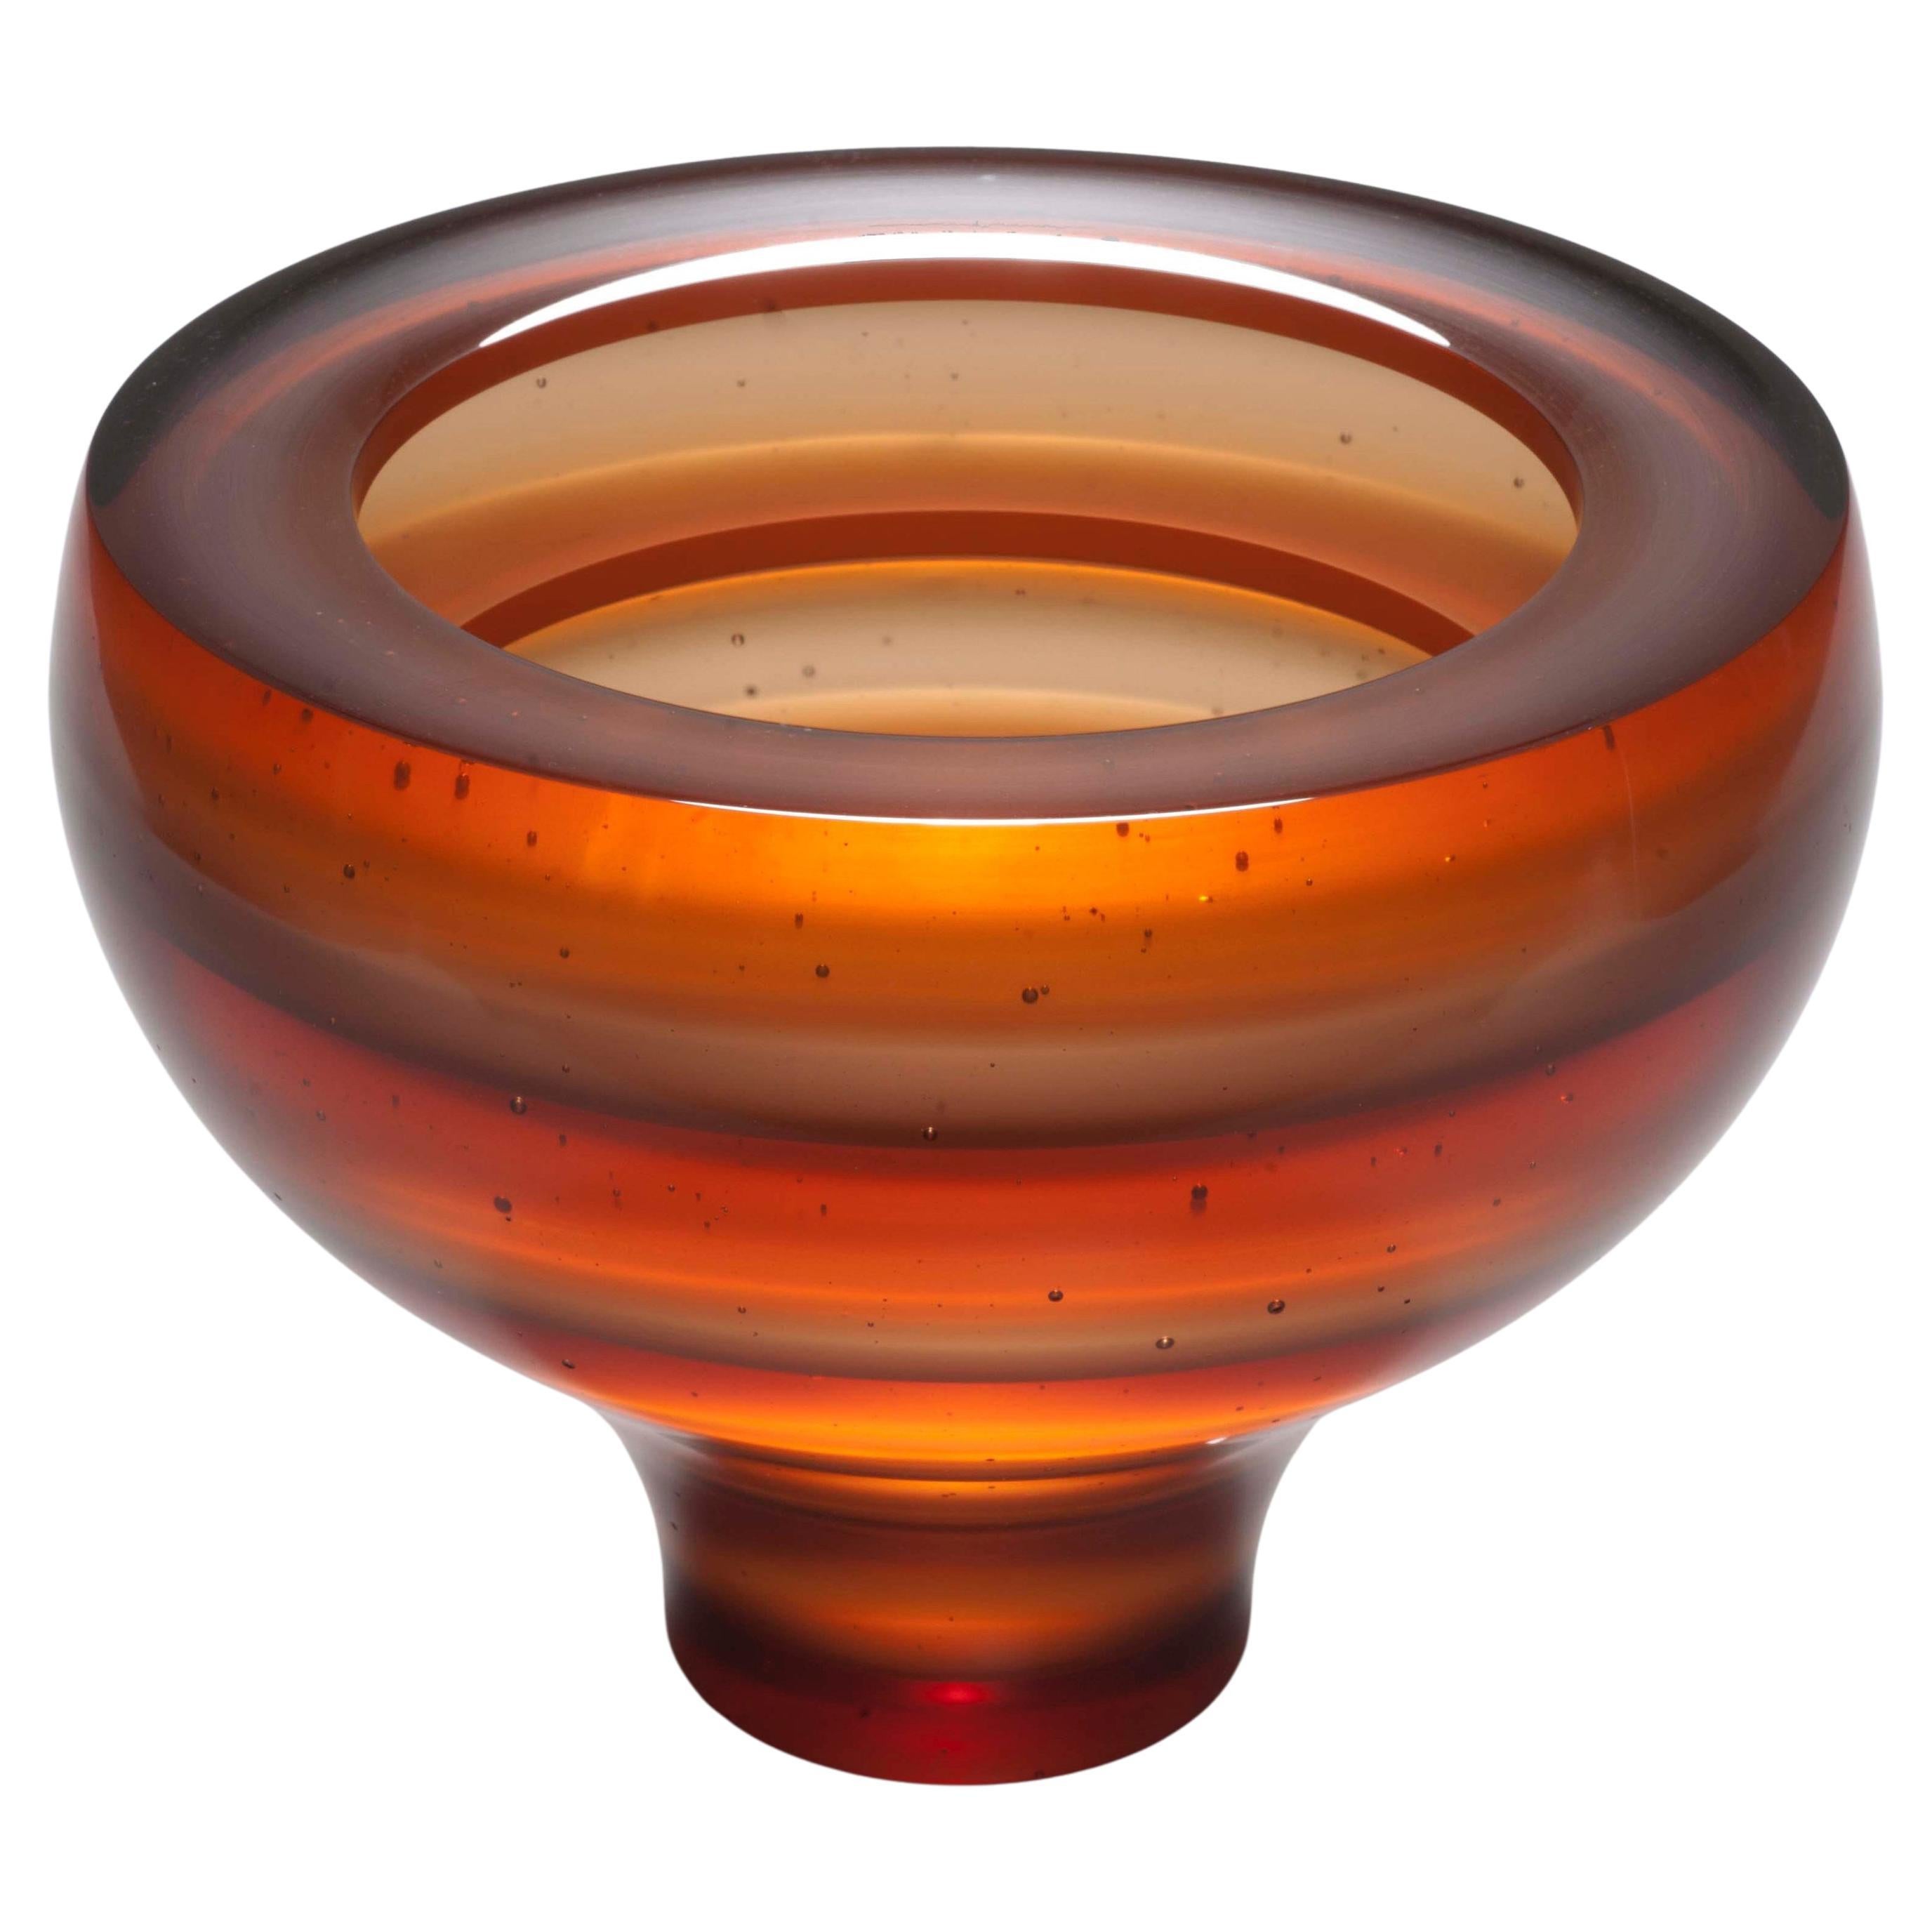 Luka, a unique amber / orange glass art work and centrepiece by Paul Stopler